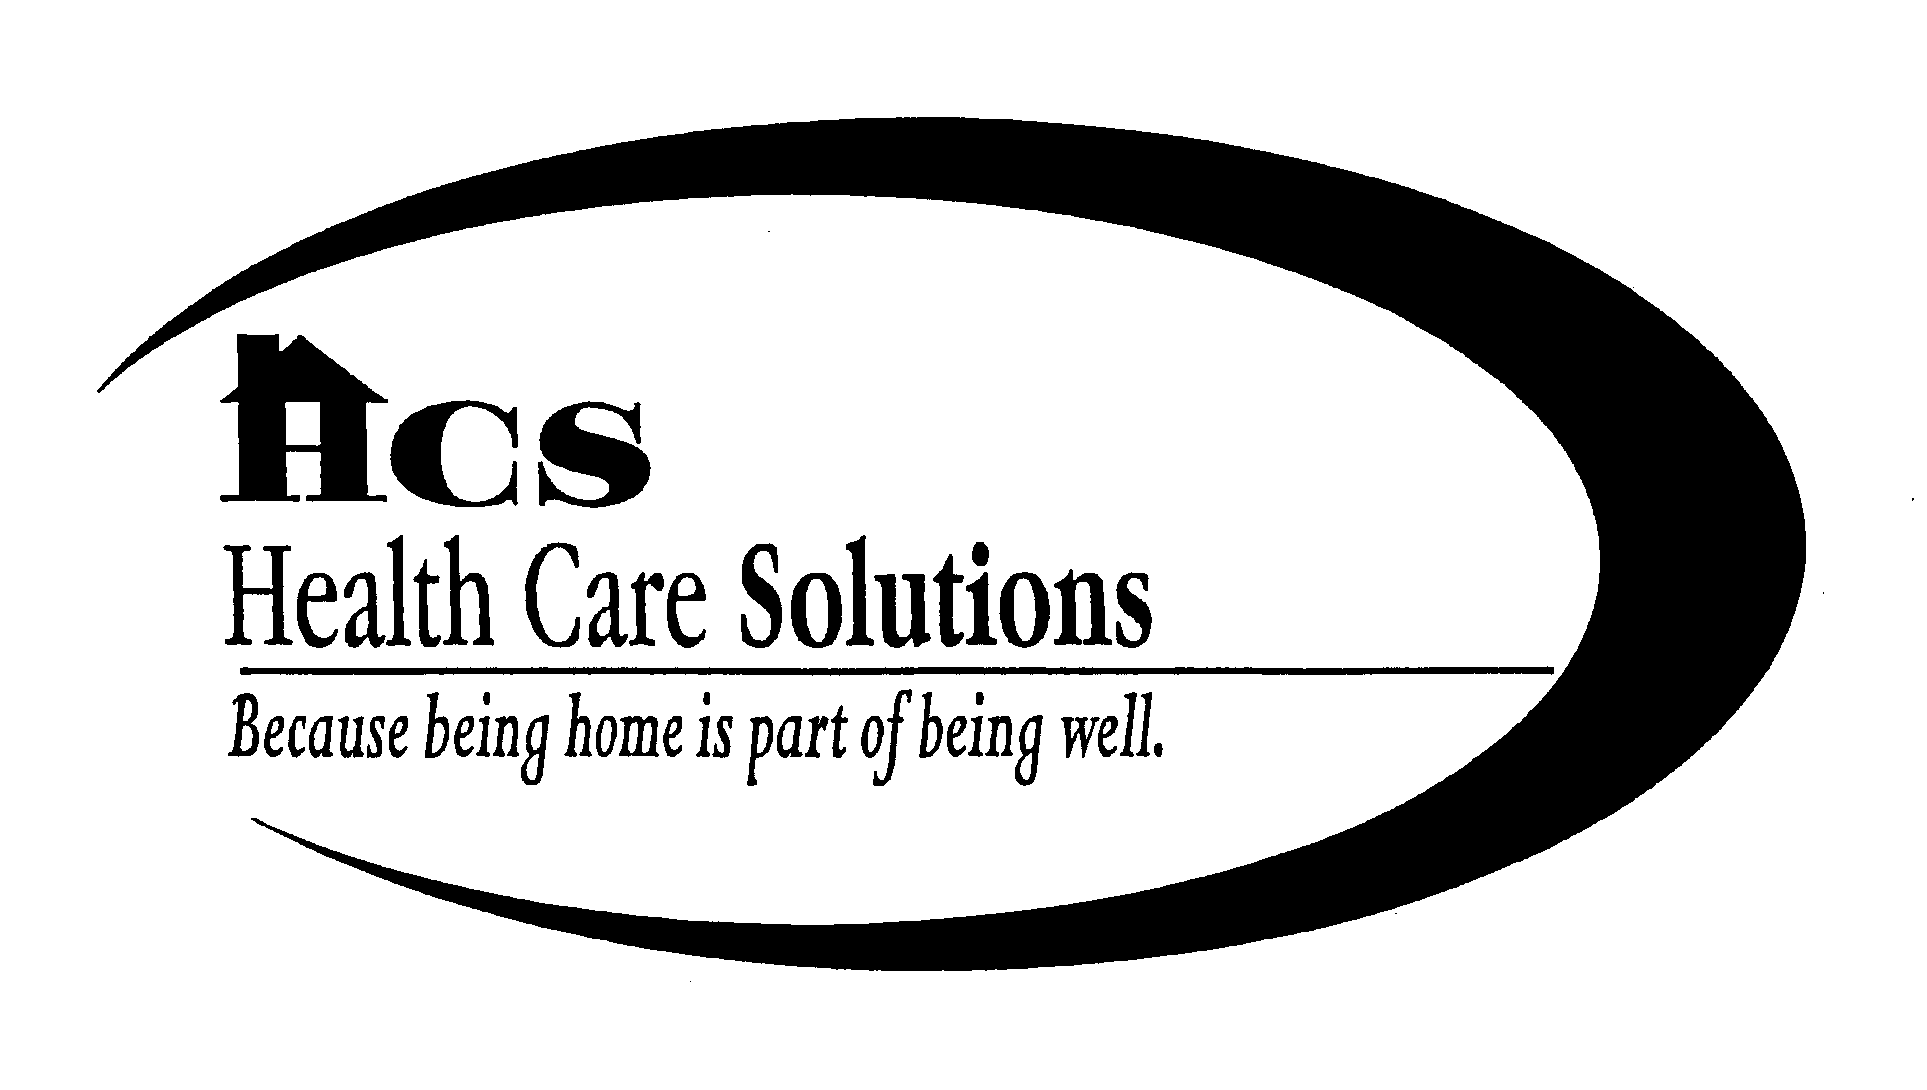  HCS HEALTH CARE SOLUTIONS BECAUSE BEING HOME IS PART OF BEING WELL.